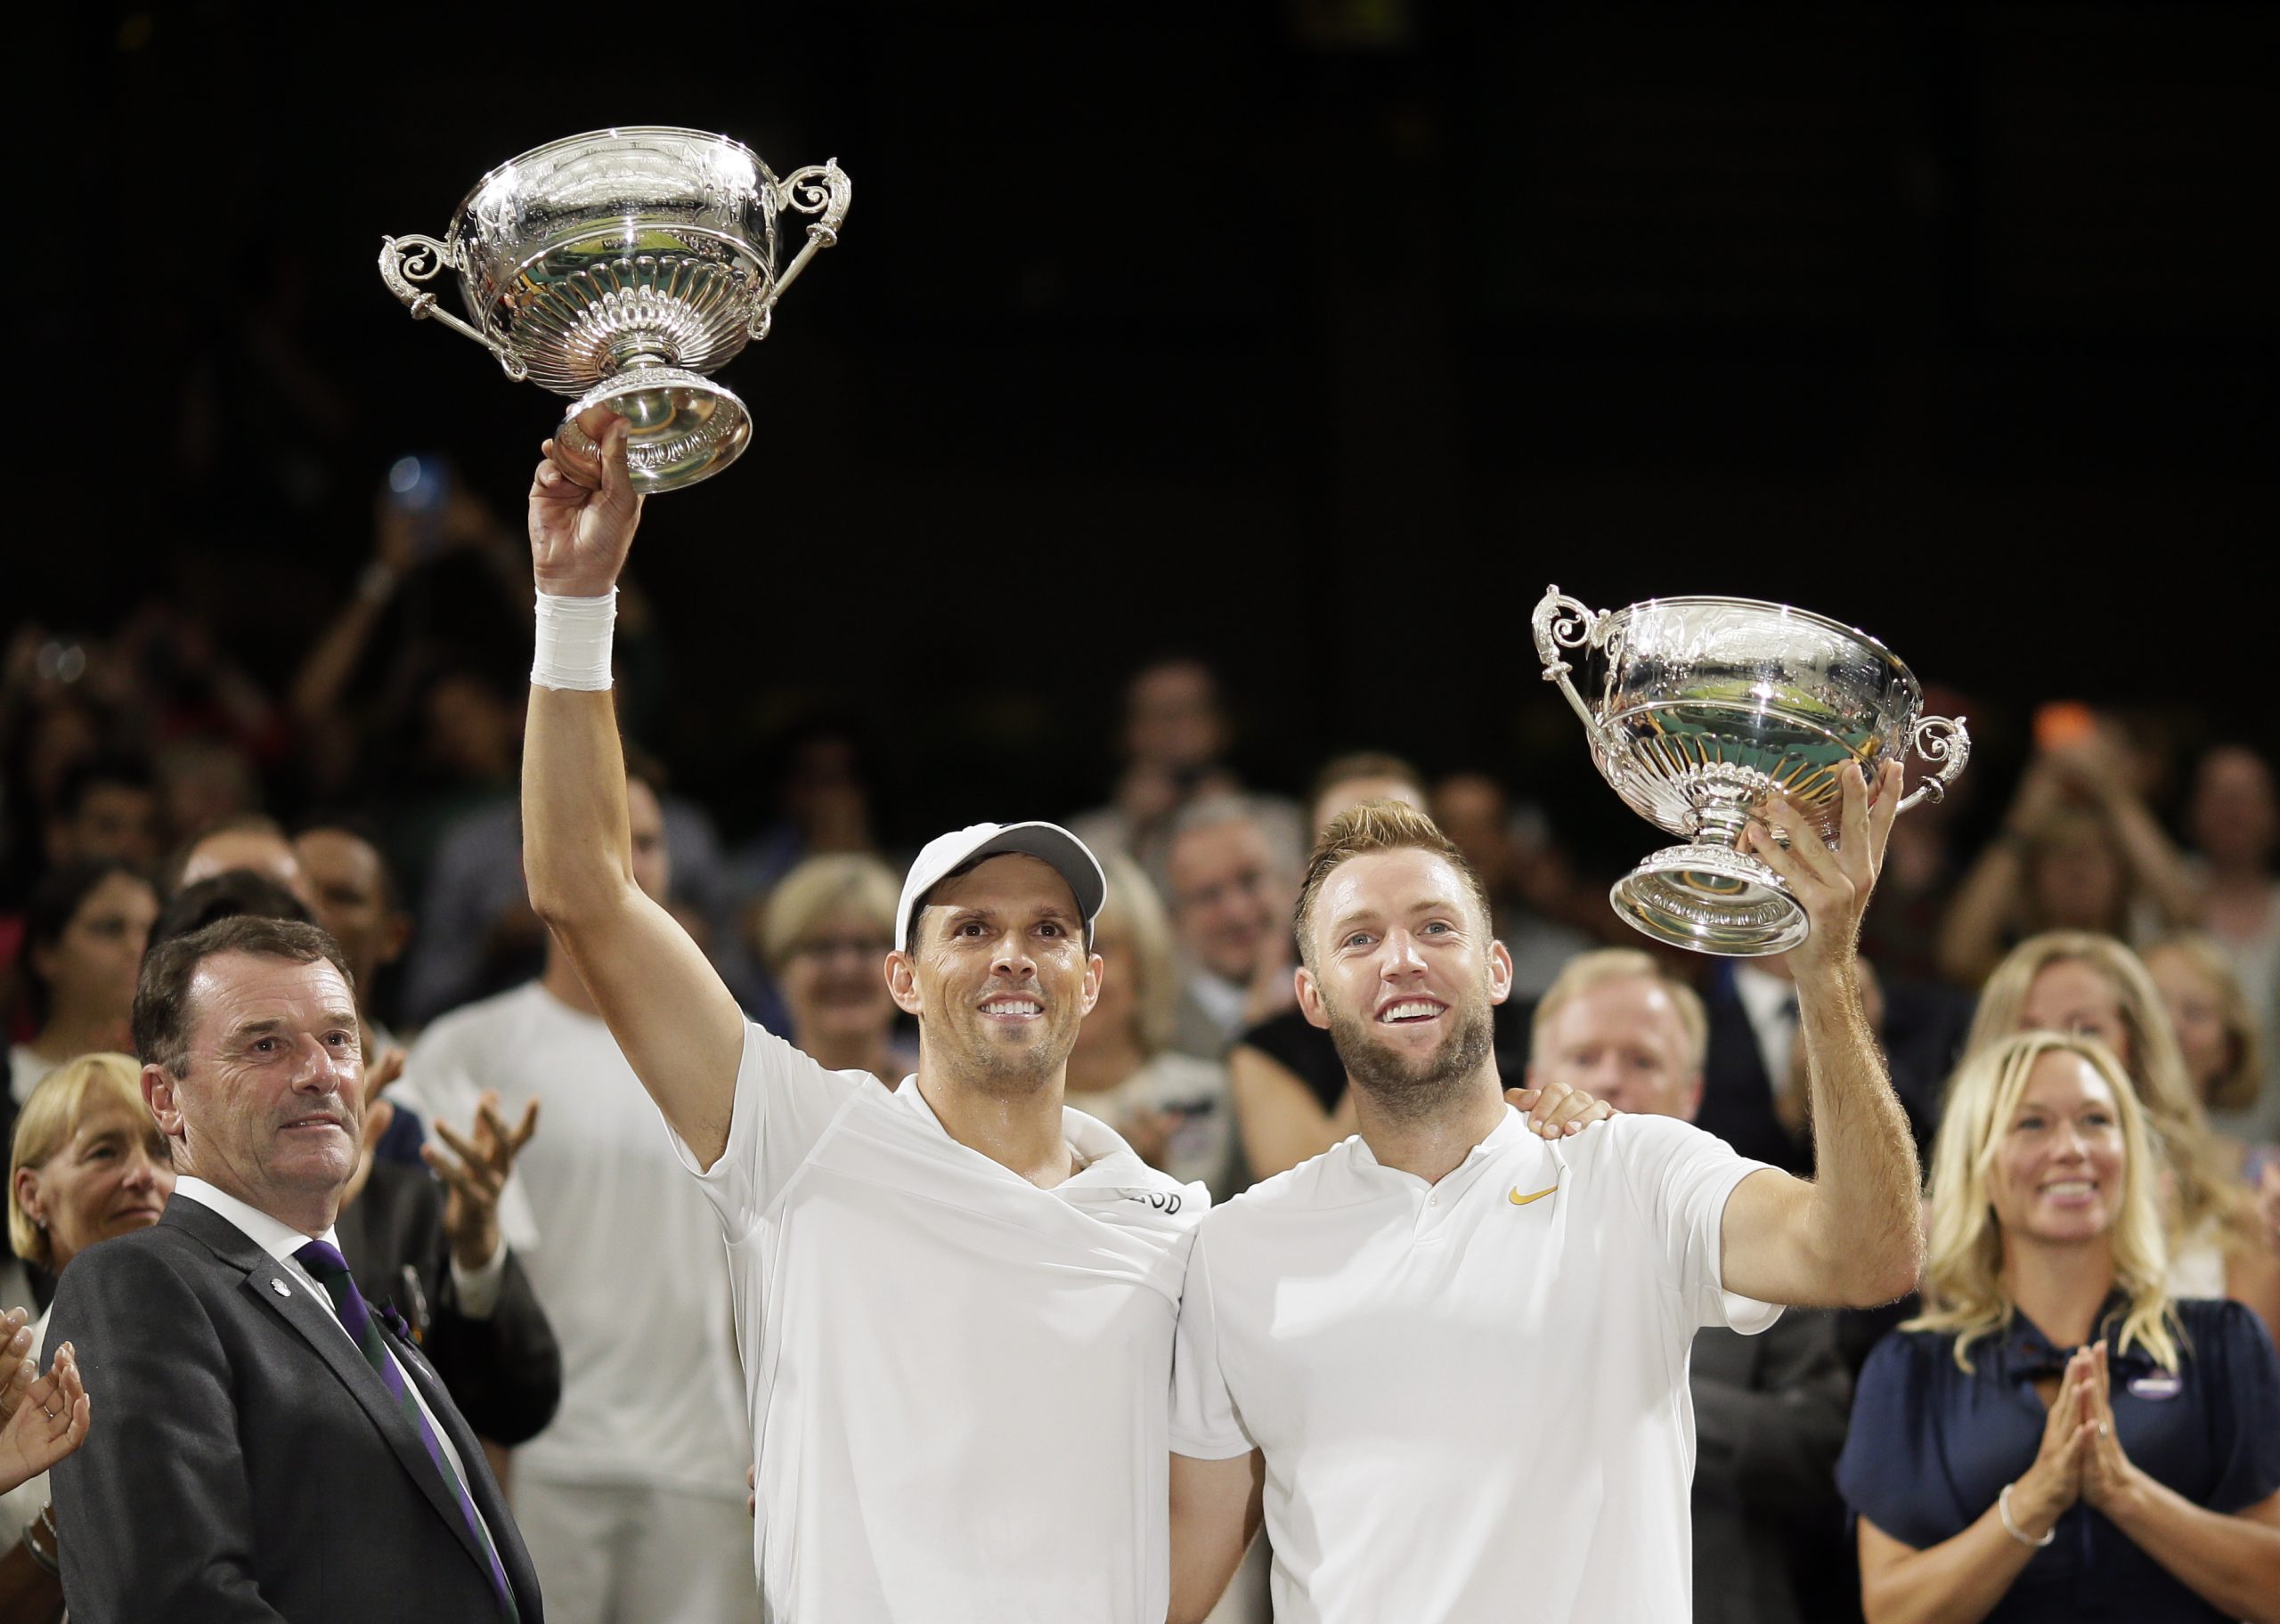 Mike Bryan, left, and Jack Sock of the US hold up their trophies after defeating South Africa's Raven Klaasen and New Zealand's Michael Venus in the men's doubles final match at the Wimbledon Tennis Championships, in London